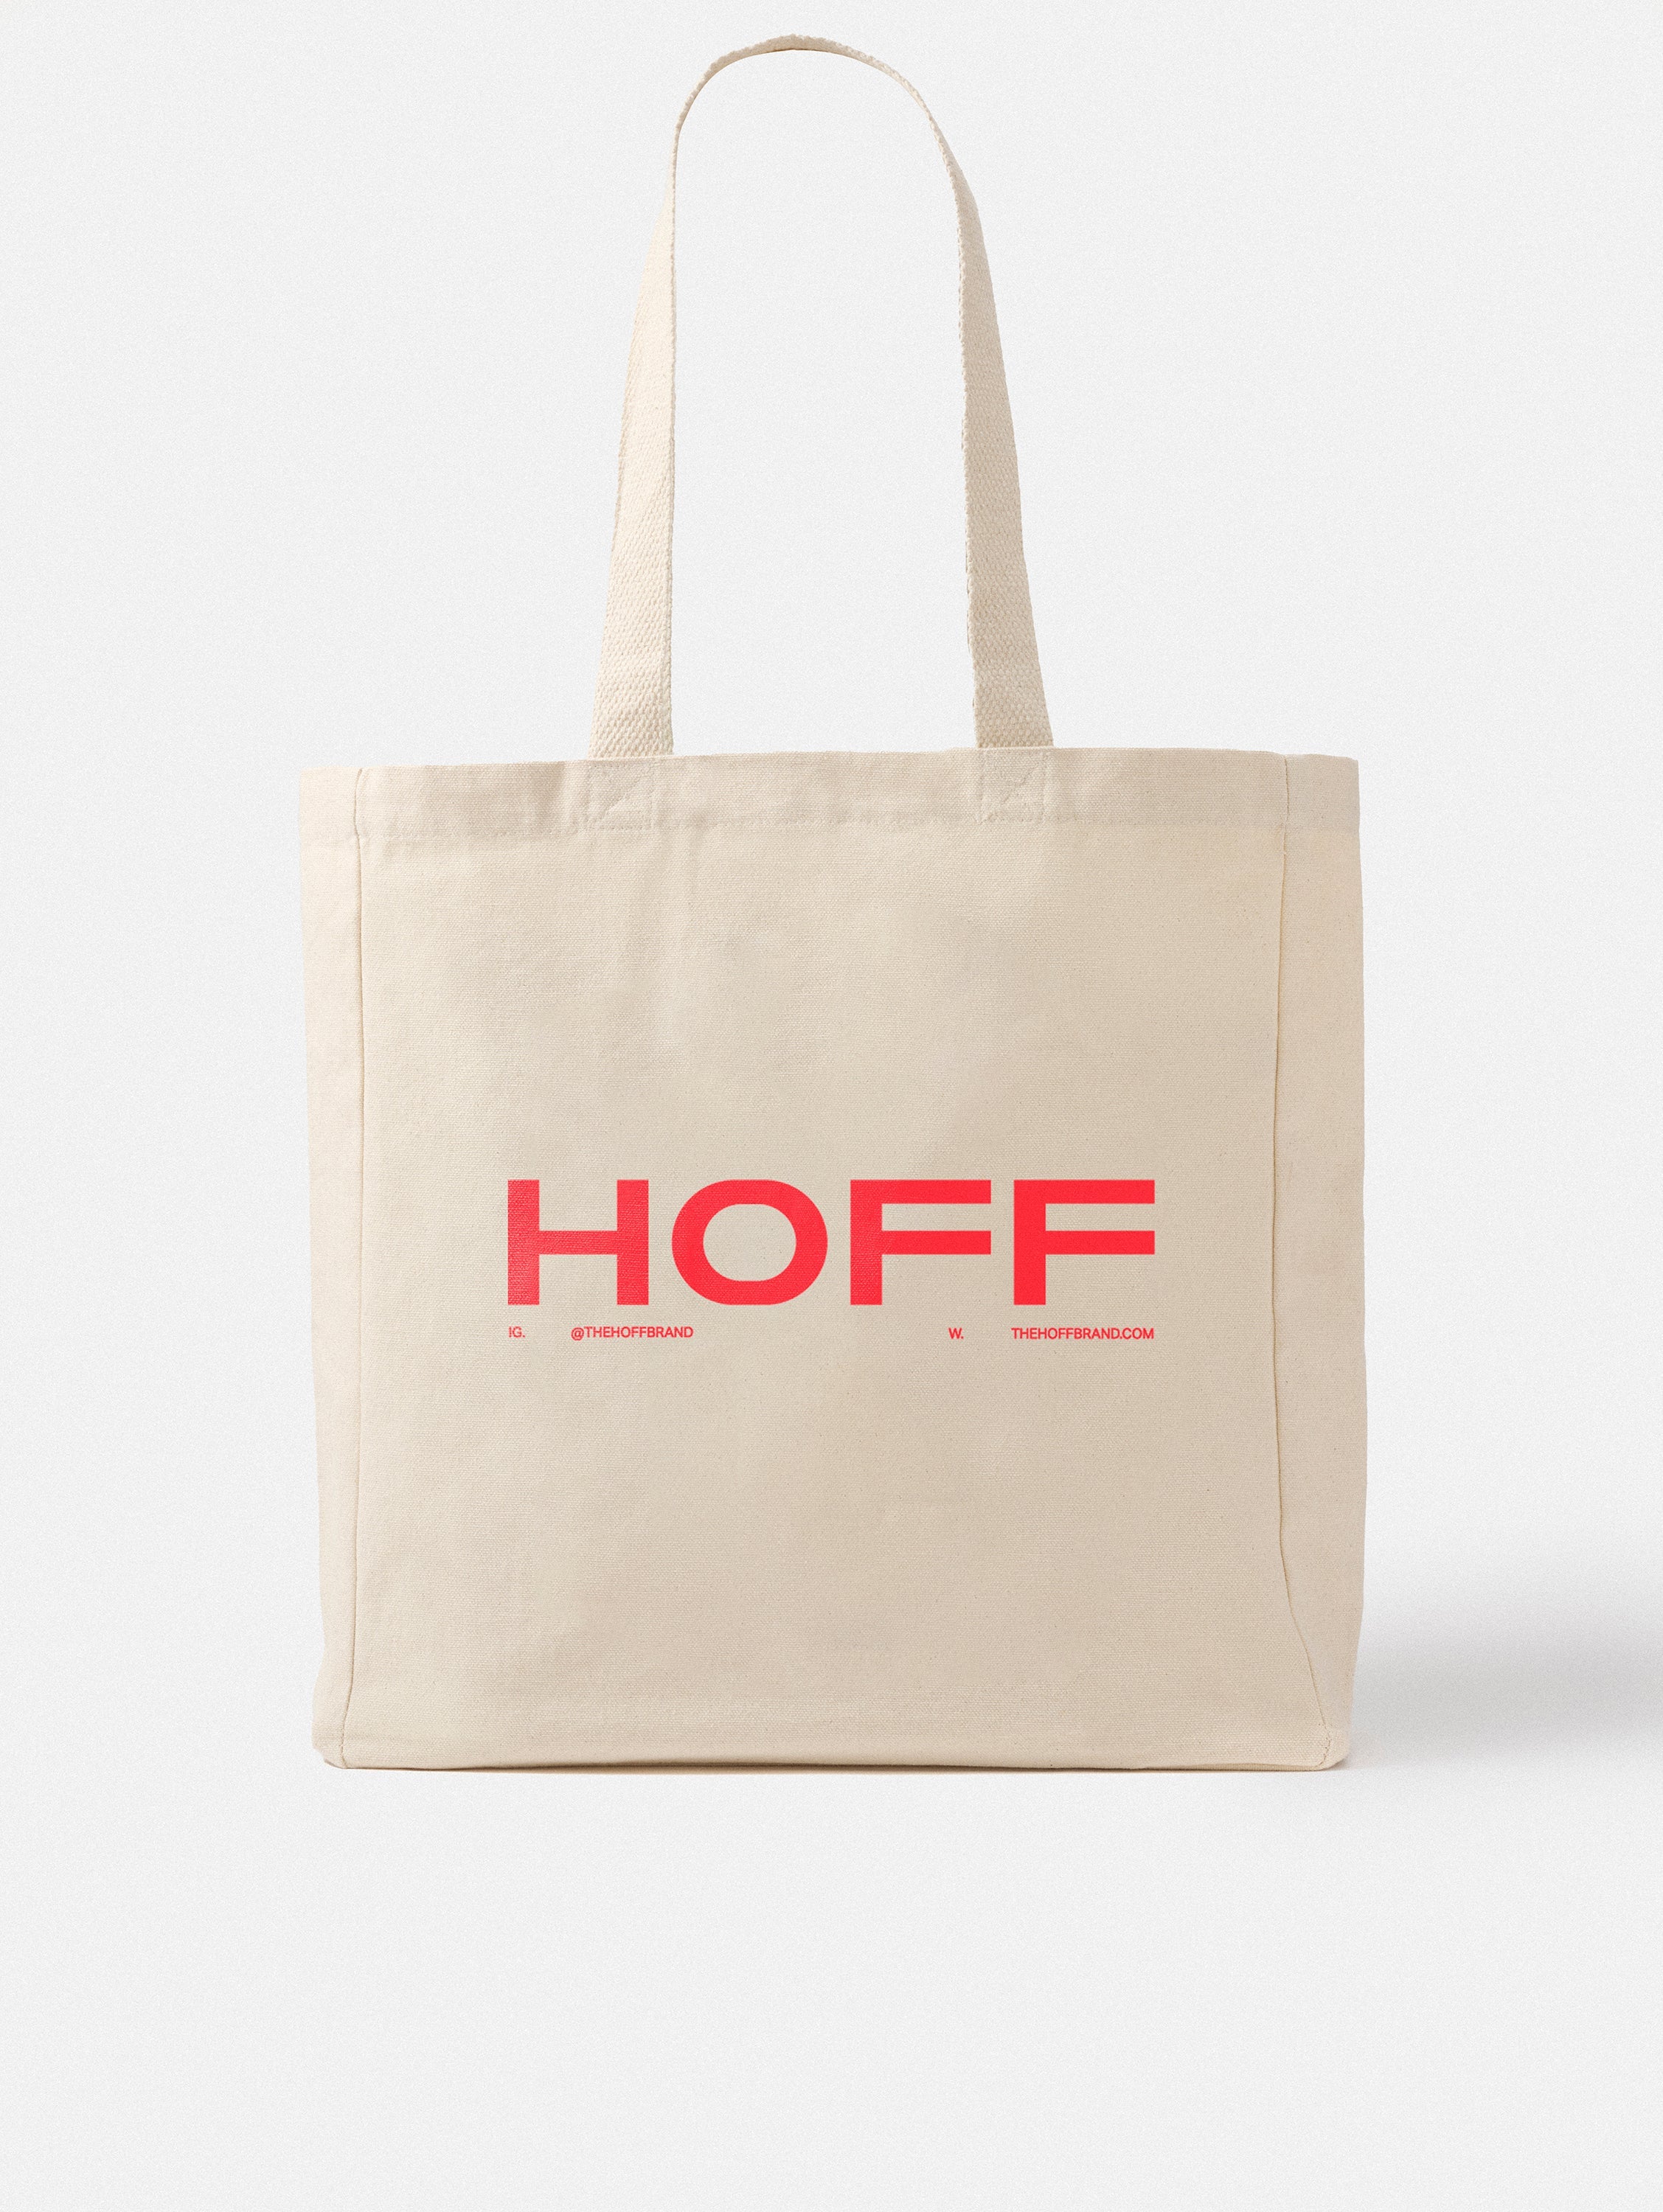 TOTE ART AT FIRST SIGHT (VALENTINSTAG-EDITION)